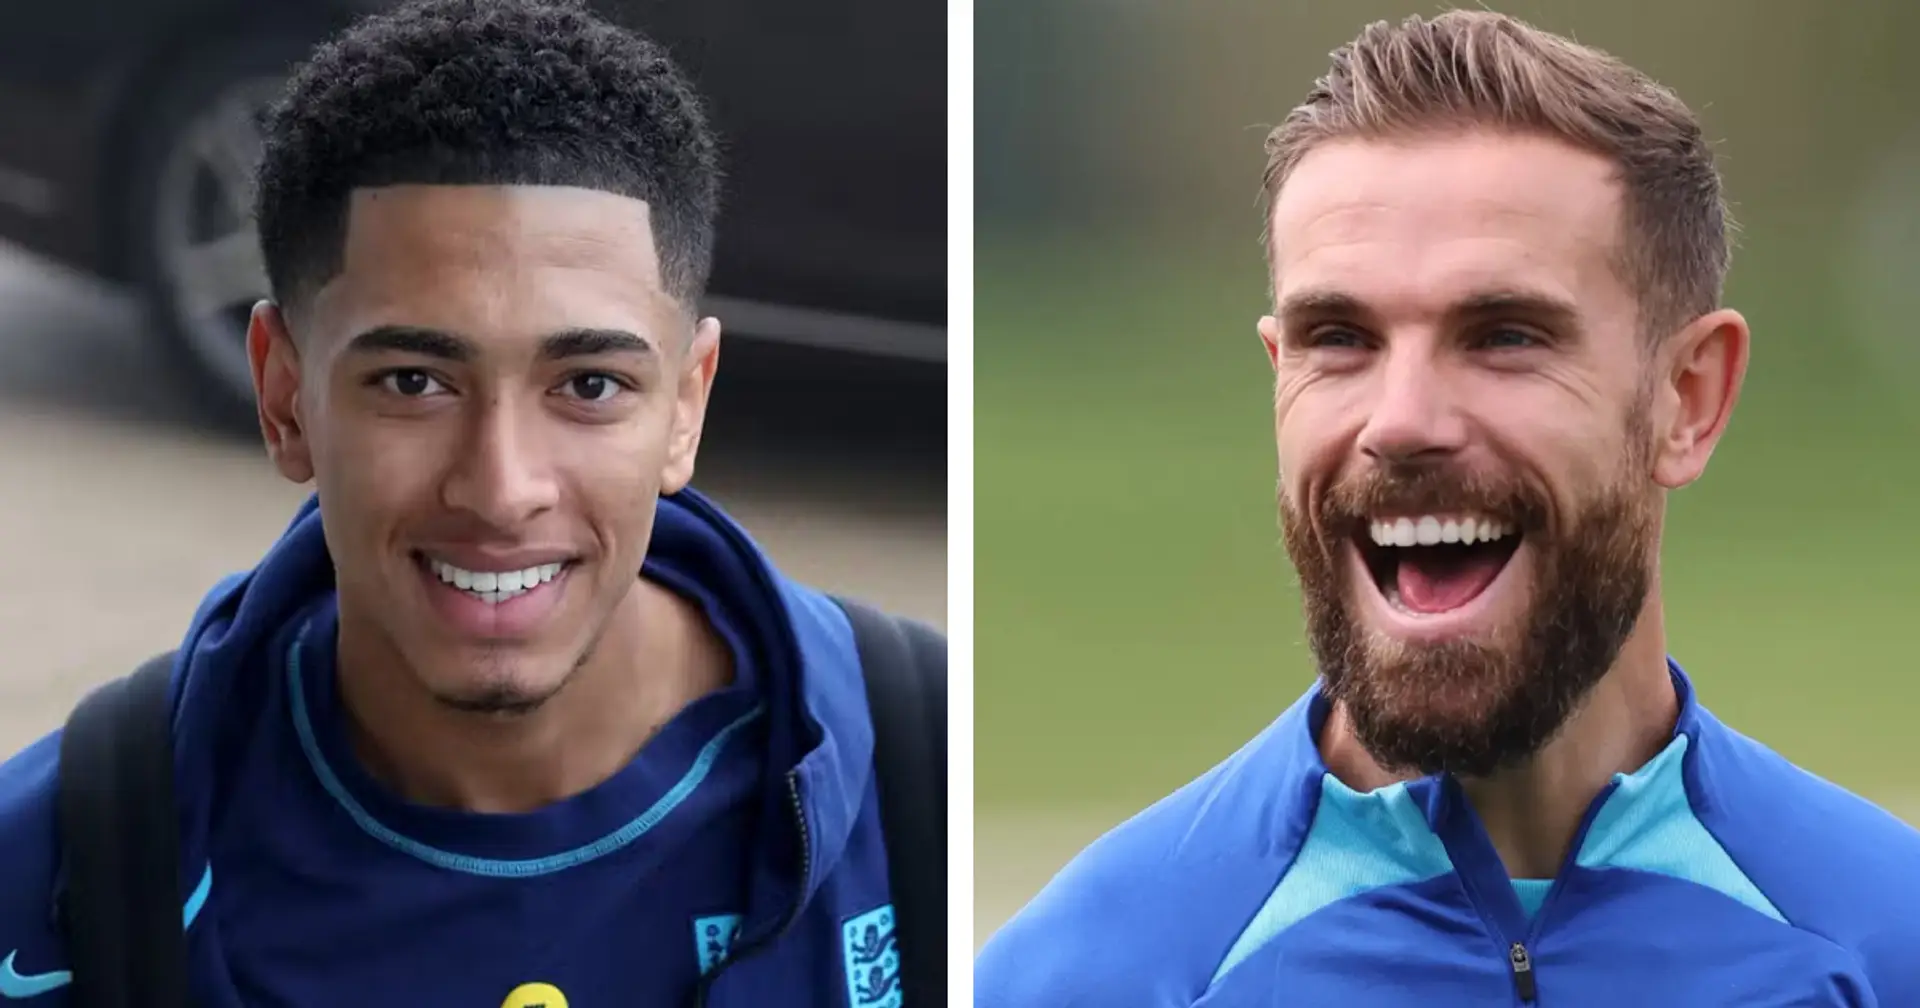 'Getting protected by a 19-year-old, I love it': Henderson reacts as Bellingham demands 'respect' for England teammate